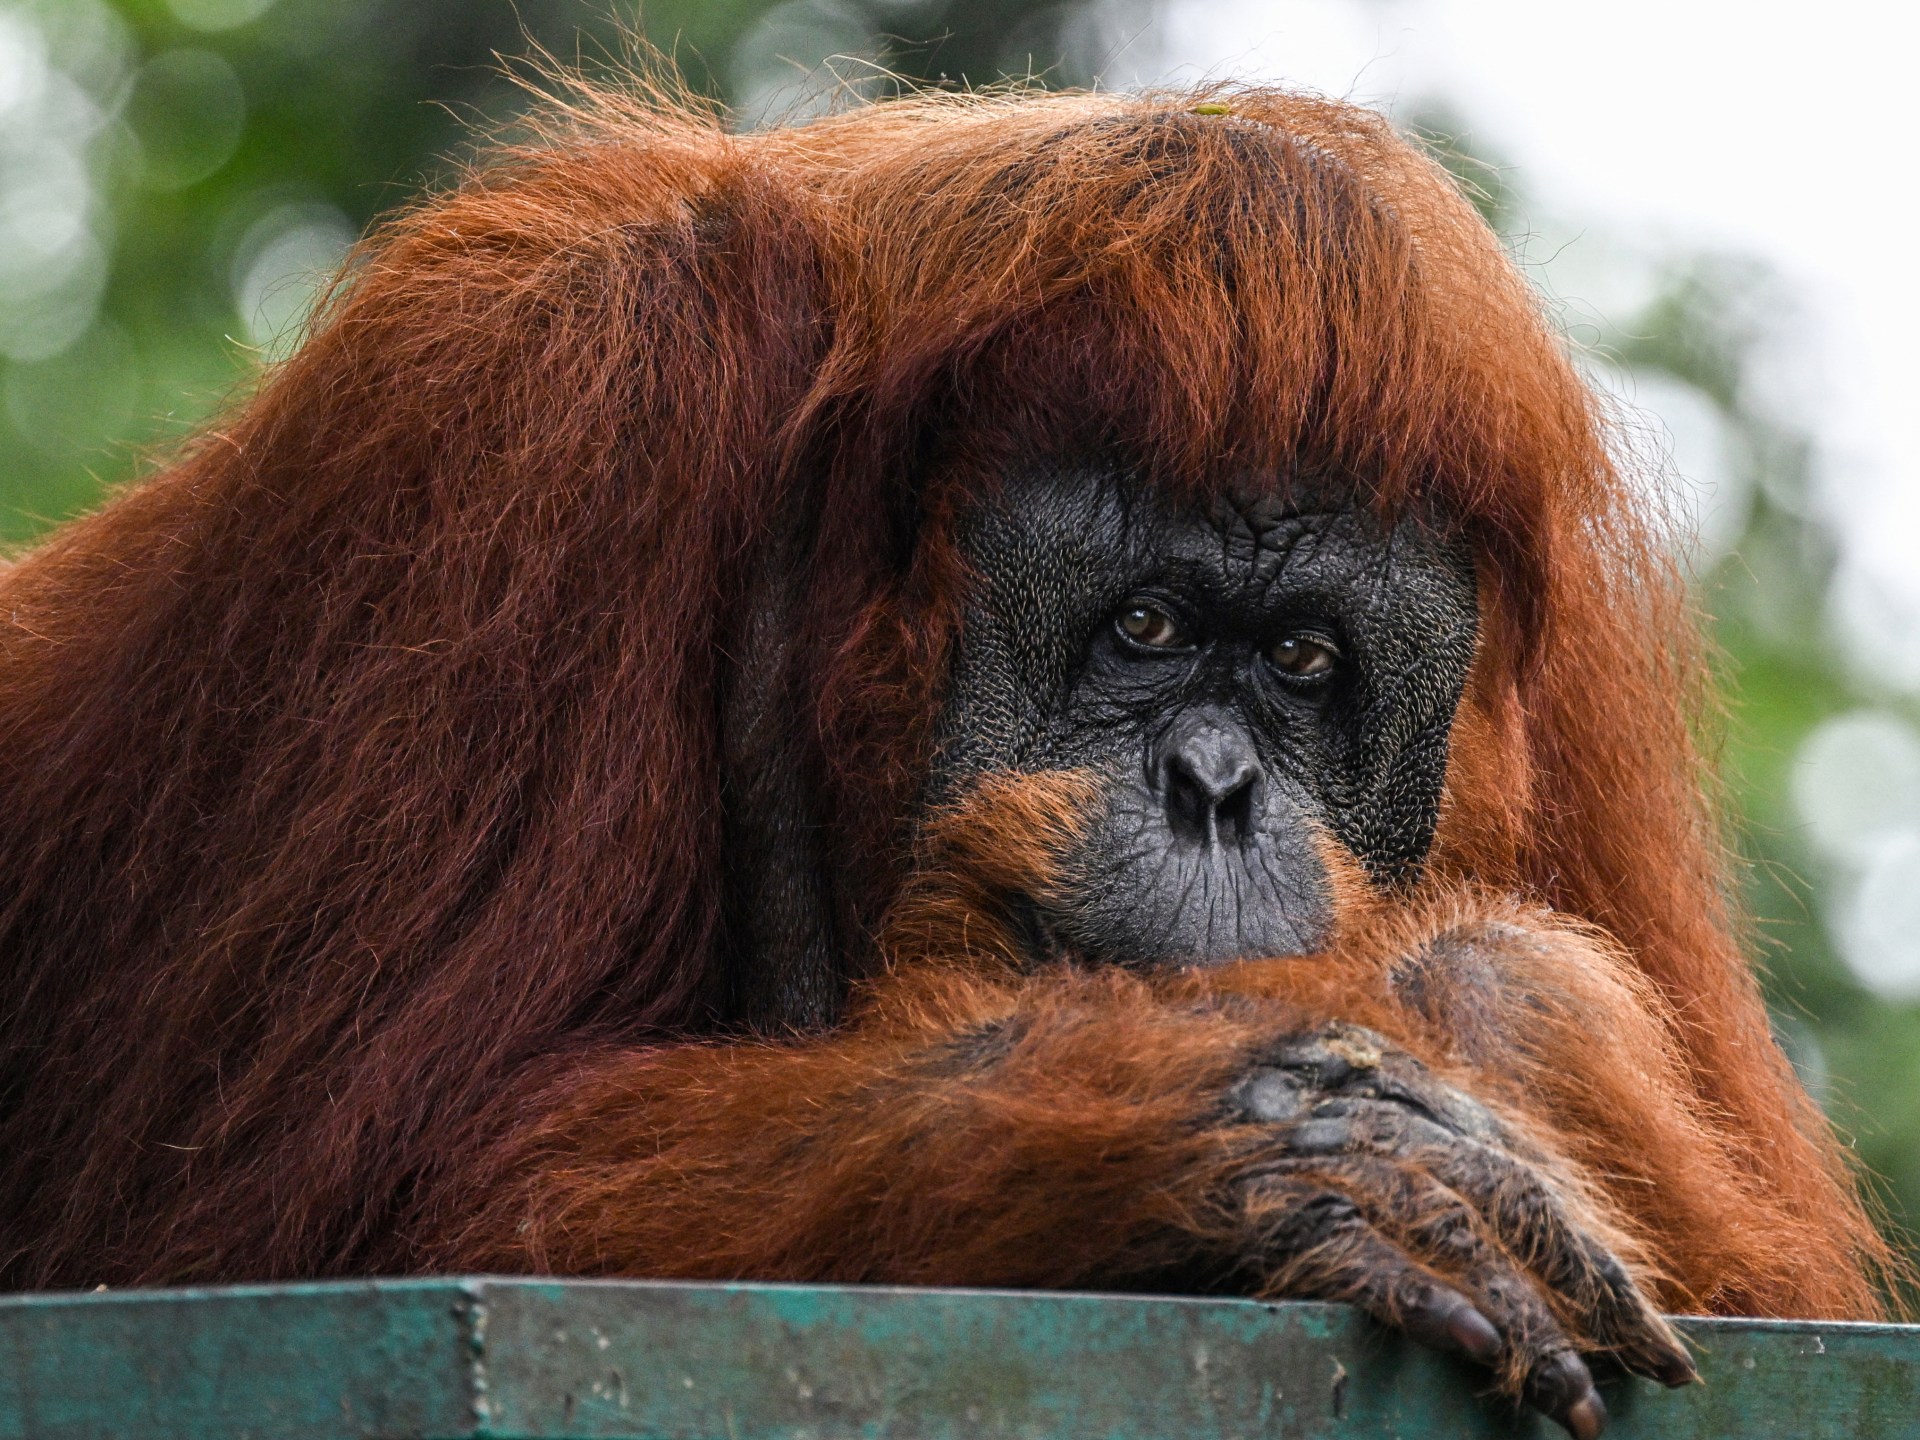 Malaysia plans orangutan diplomacy in palm oil pitch | Environment News [Video]